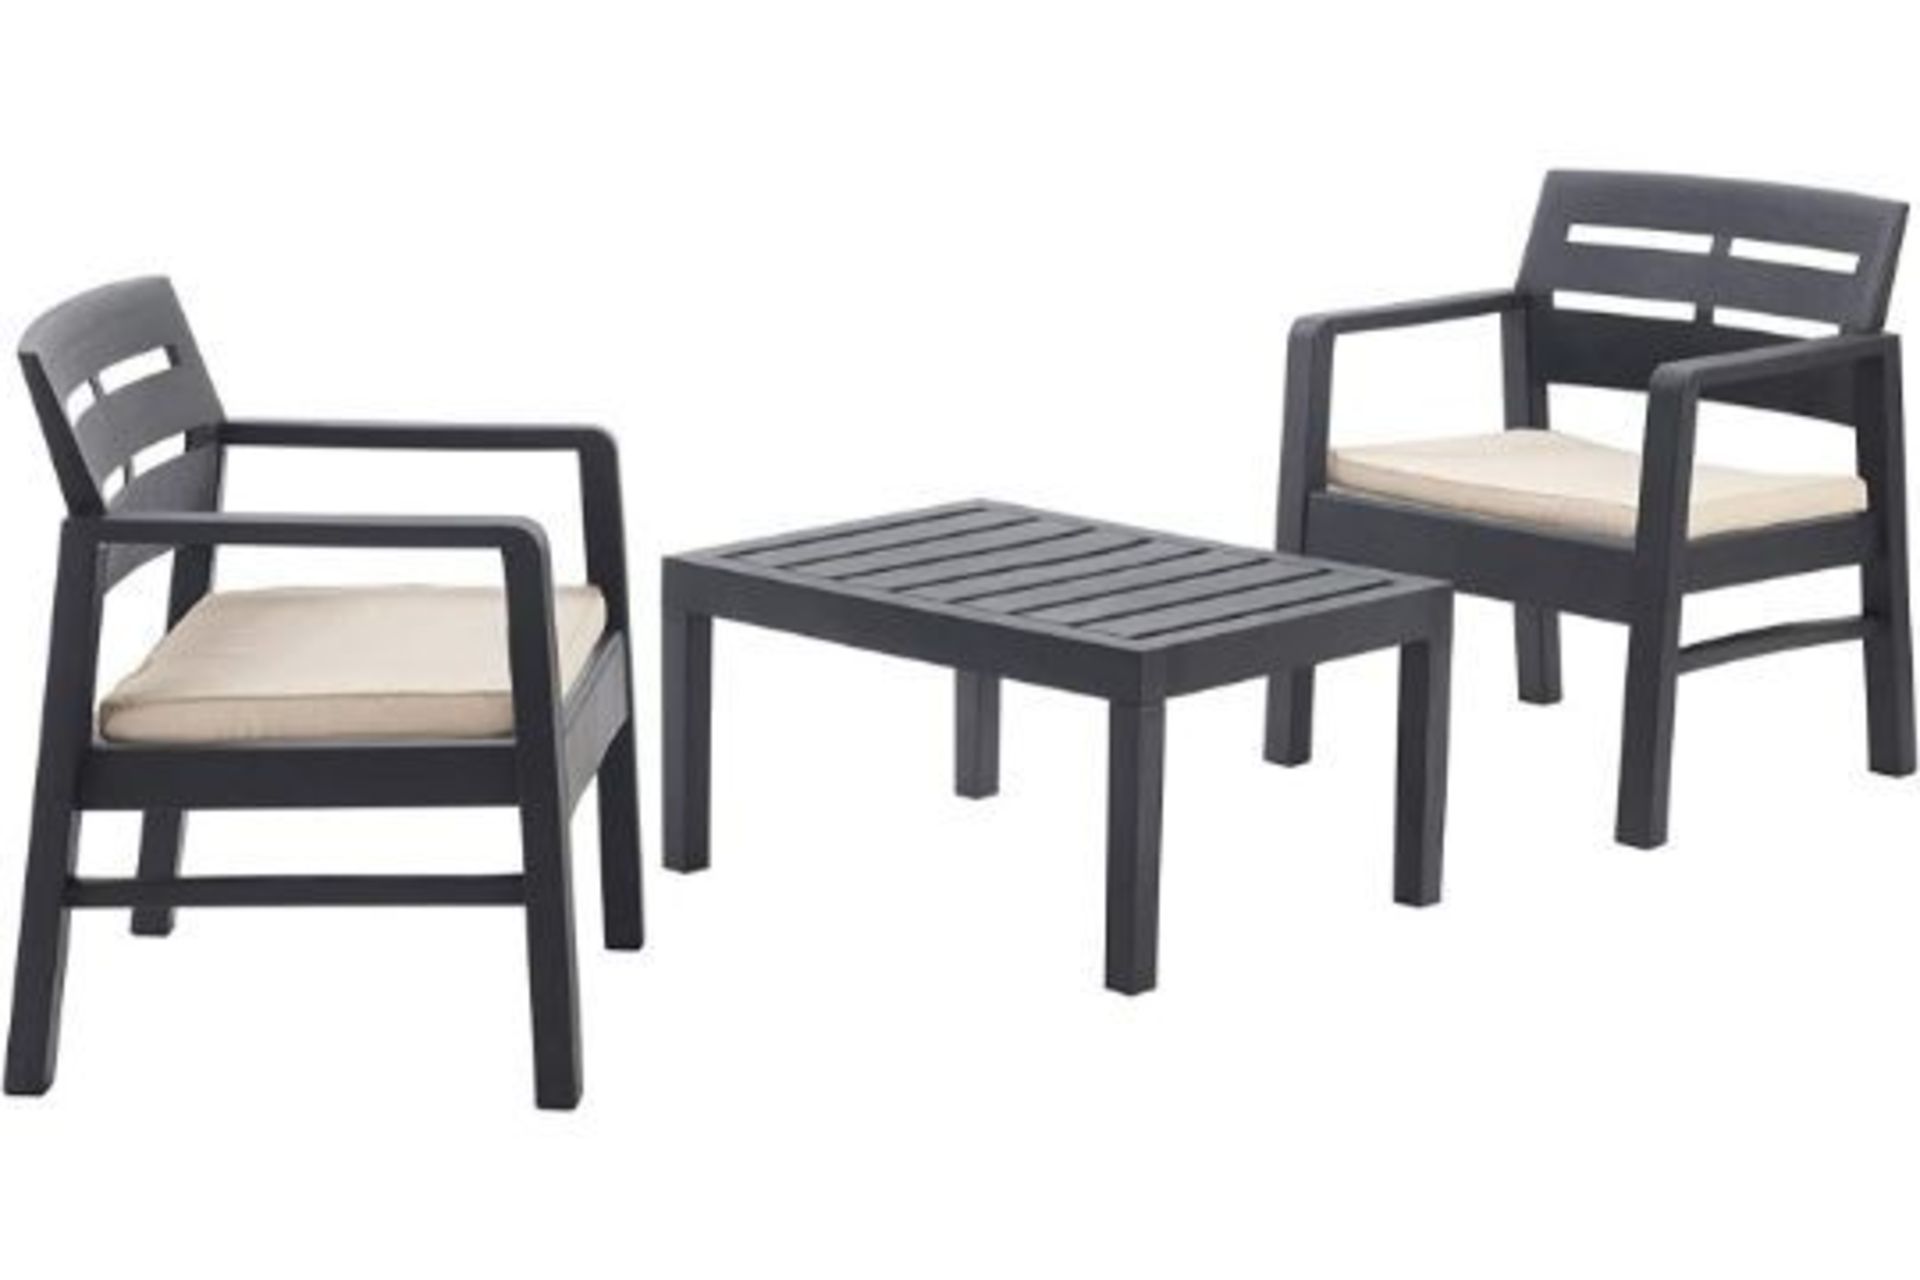 PALLET TO CONTAIN 12 X BRAND NEW IPAE WOOD GRAIN EFFECT GARDEN FURNITURE SET WITH TABLE AND 2